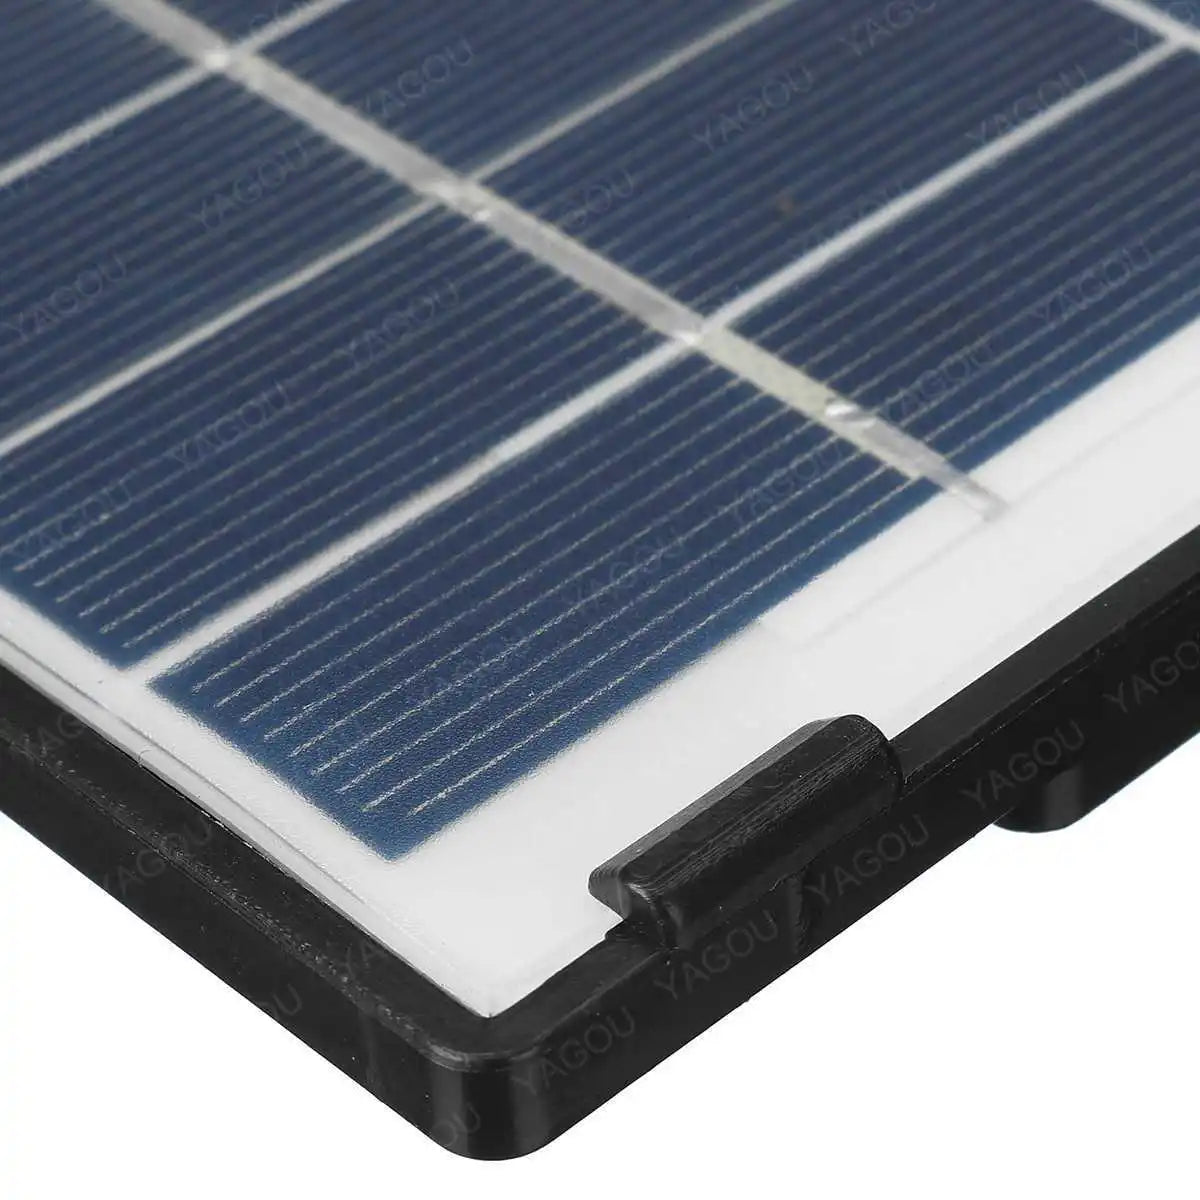 30W Portable Solar Panel, Waterproof portable solar panel kit for charging devices outdoors.